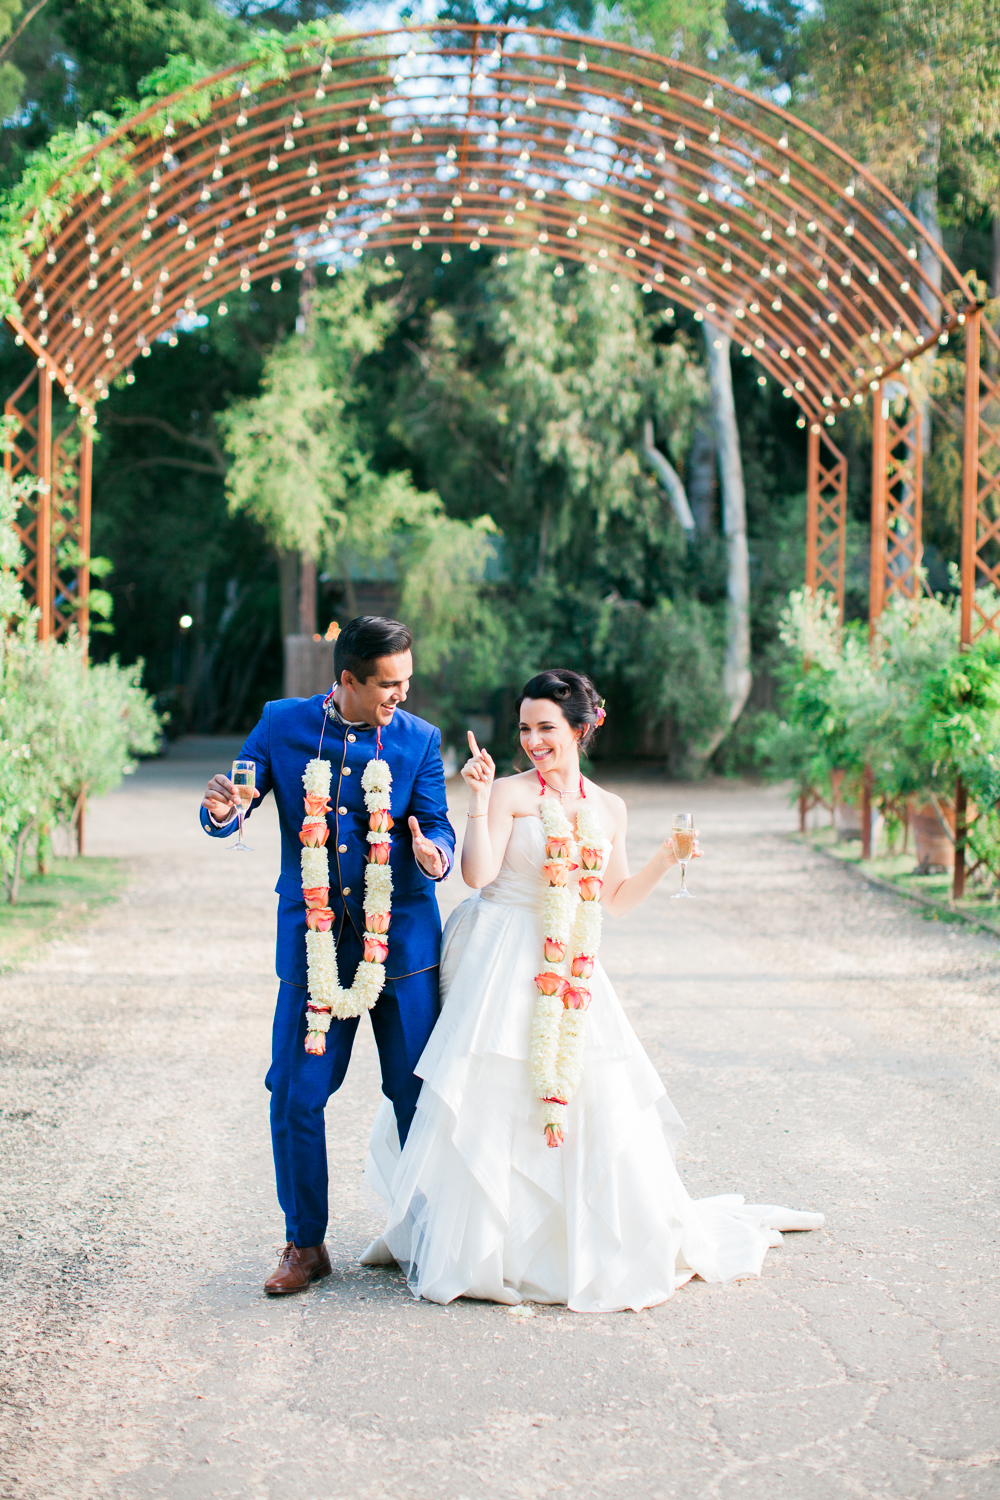 Groom in blue Indian wedding outfit and bride in white dress both wearing long floral garlands dance outdoors under an archway of lights in a photo by Laura Ford